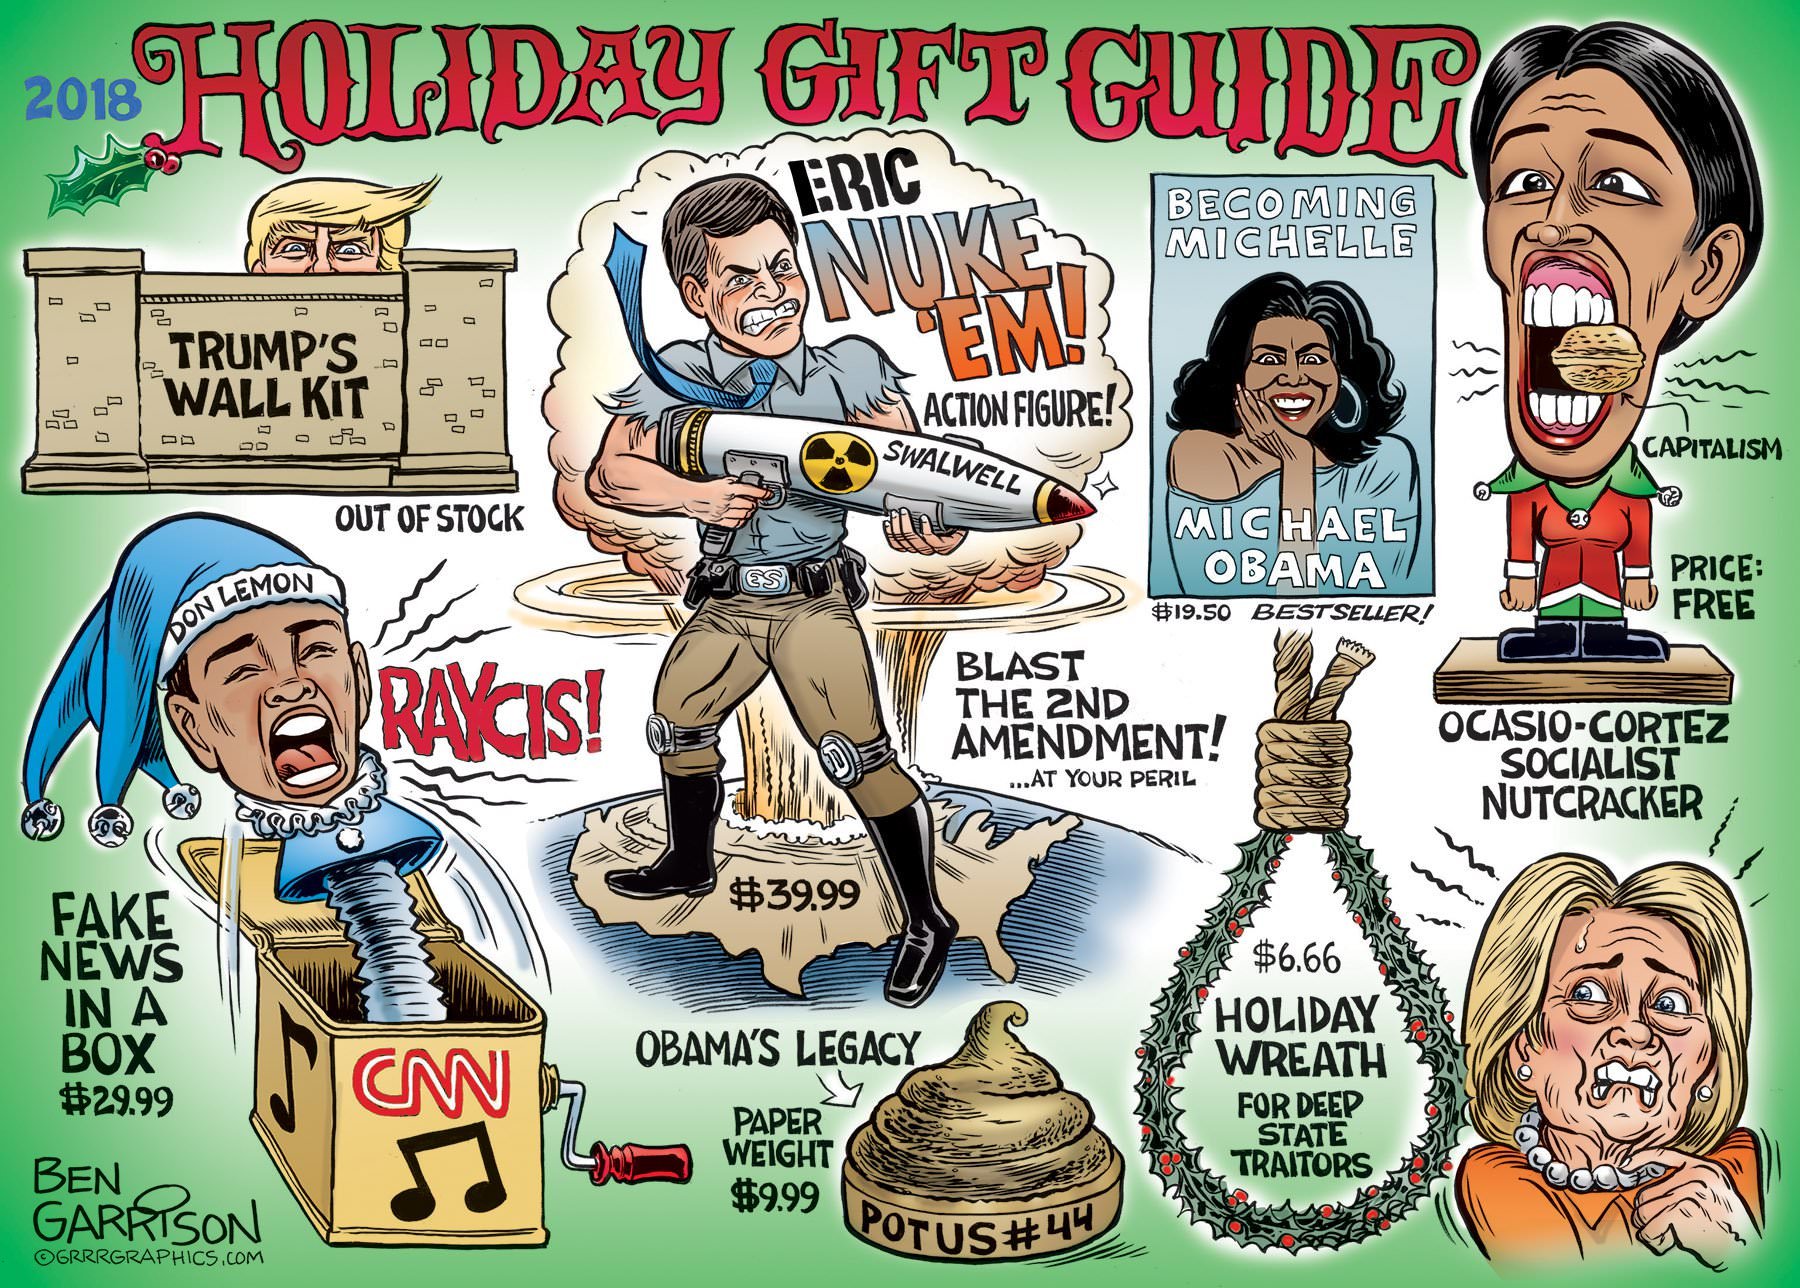 michelle obama ben garrison - 2018 Holiday Gift Guidfa Becoming Michelle Wele Trump'S Wall Kit Action Figure! Swalwes Capitalism Out Of Stock On Lemon Michael Obama Price $19.50 Bestseller W Free Blast The 2ND Amendment! OcasioCortez ...At Your Peril Soci